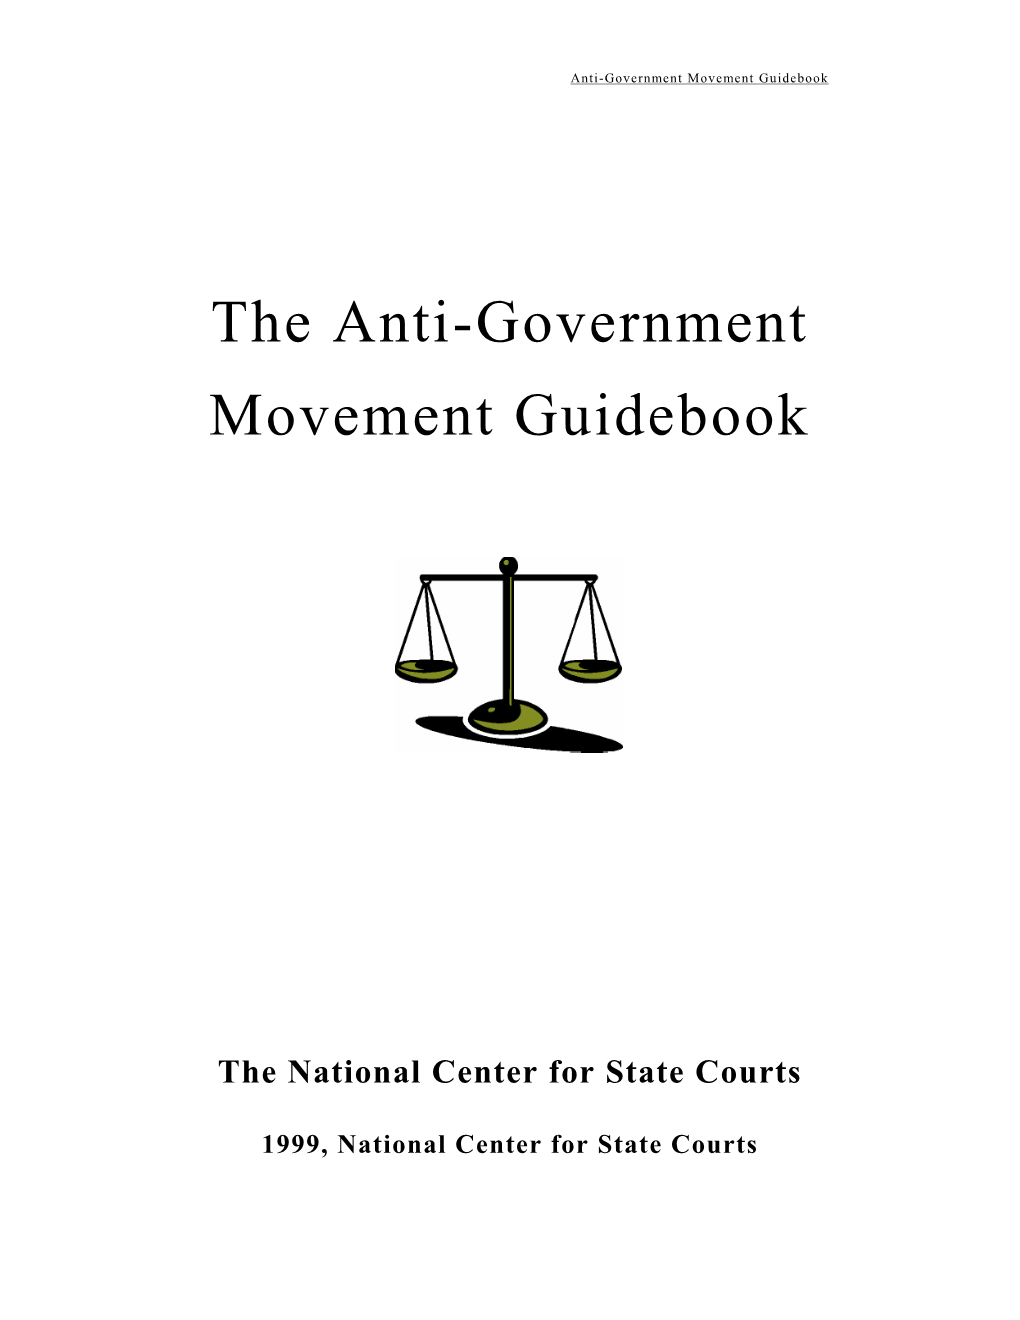 The Anti-Government Movement Guidebook 1999 State Courts